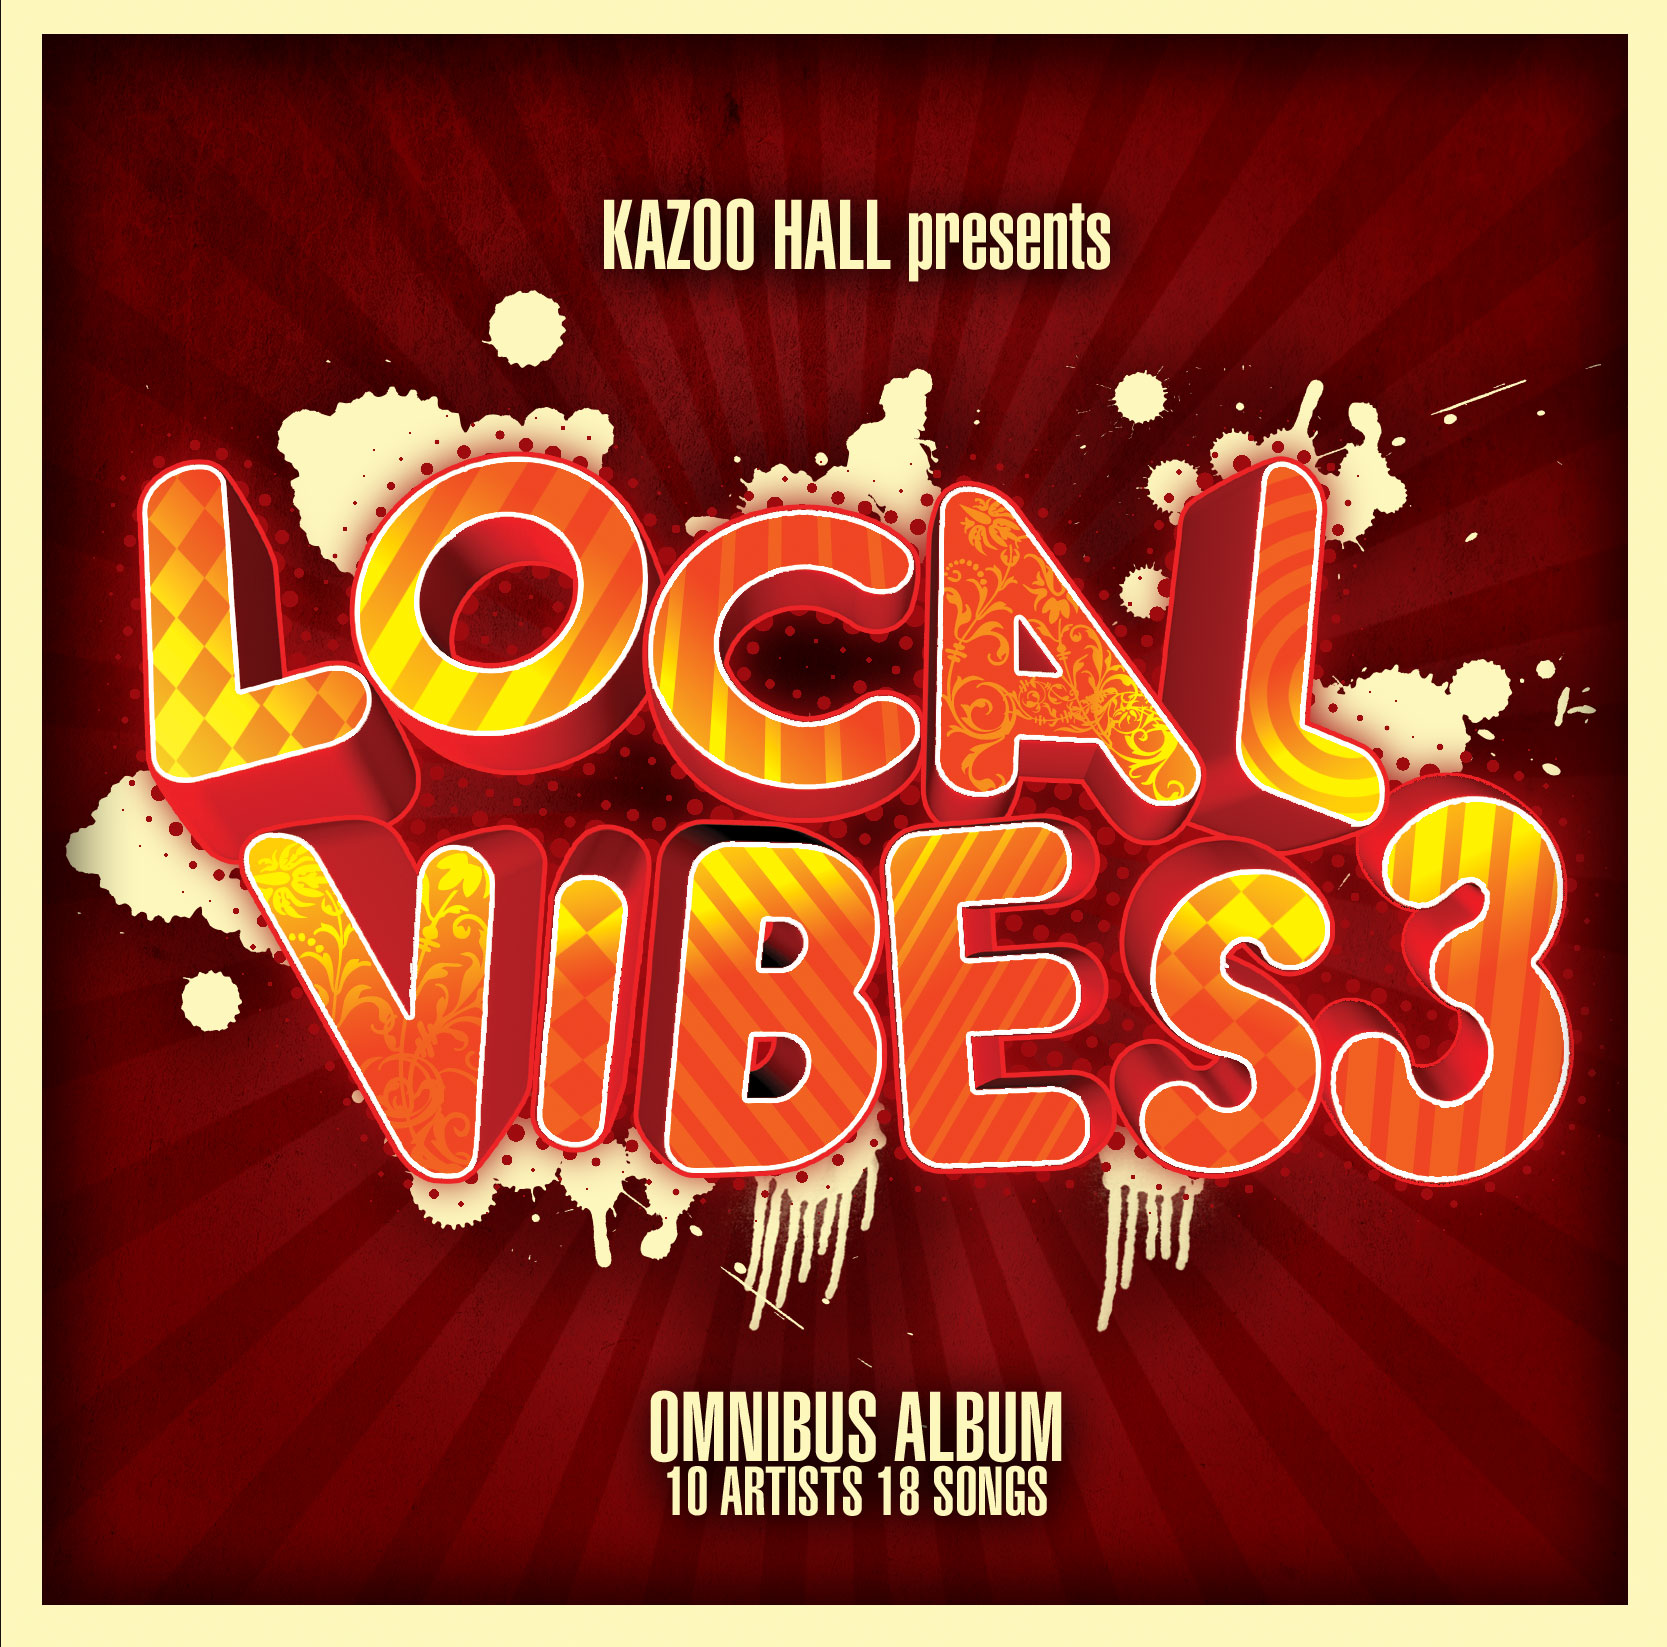 LOCAL VIBES 3